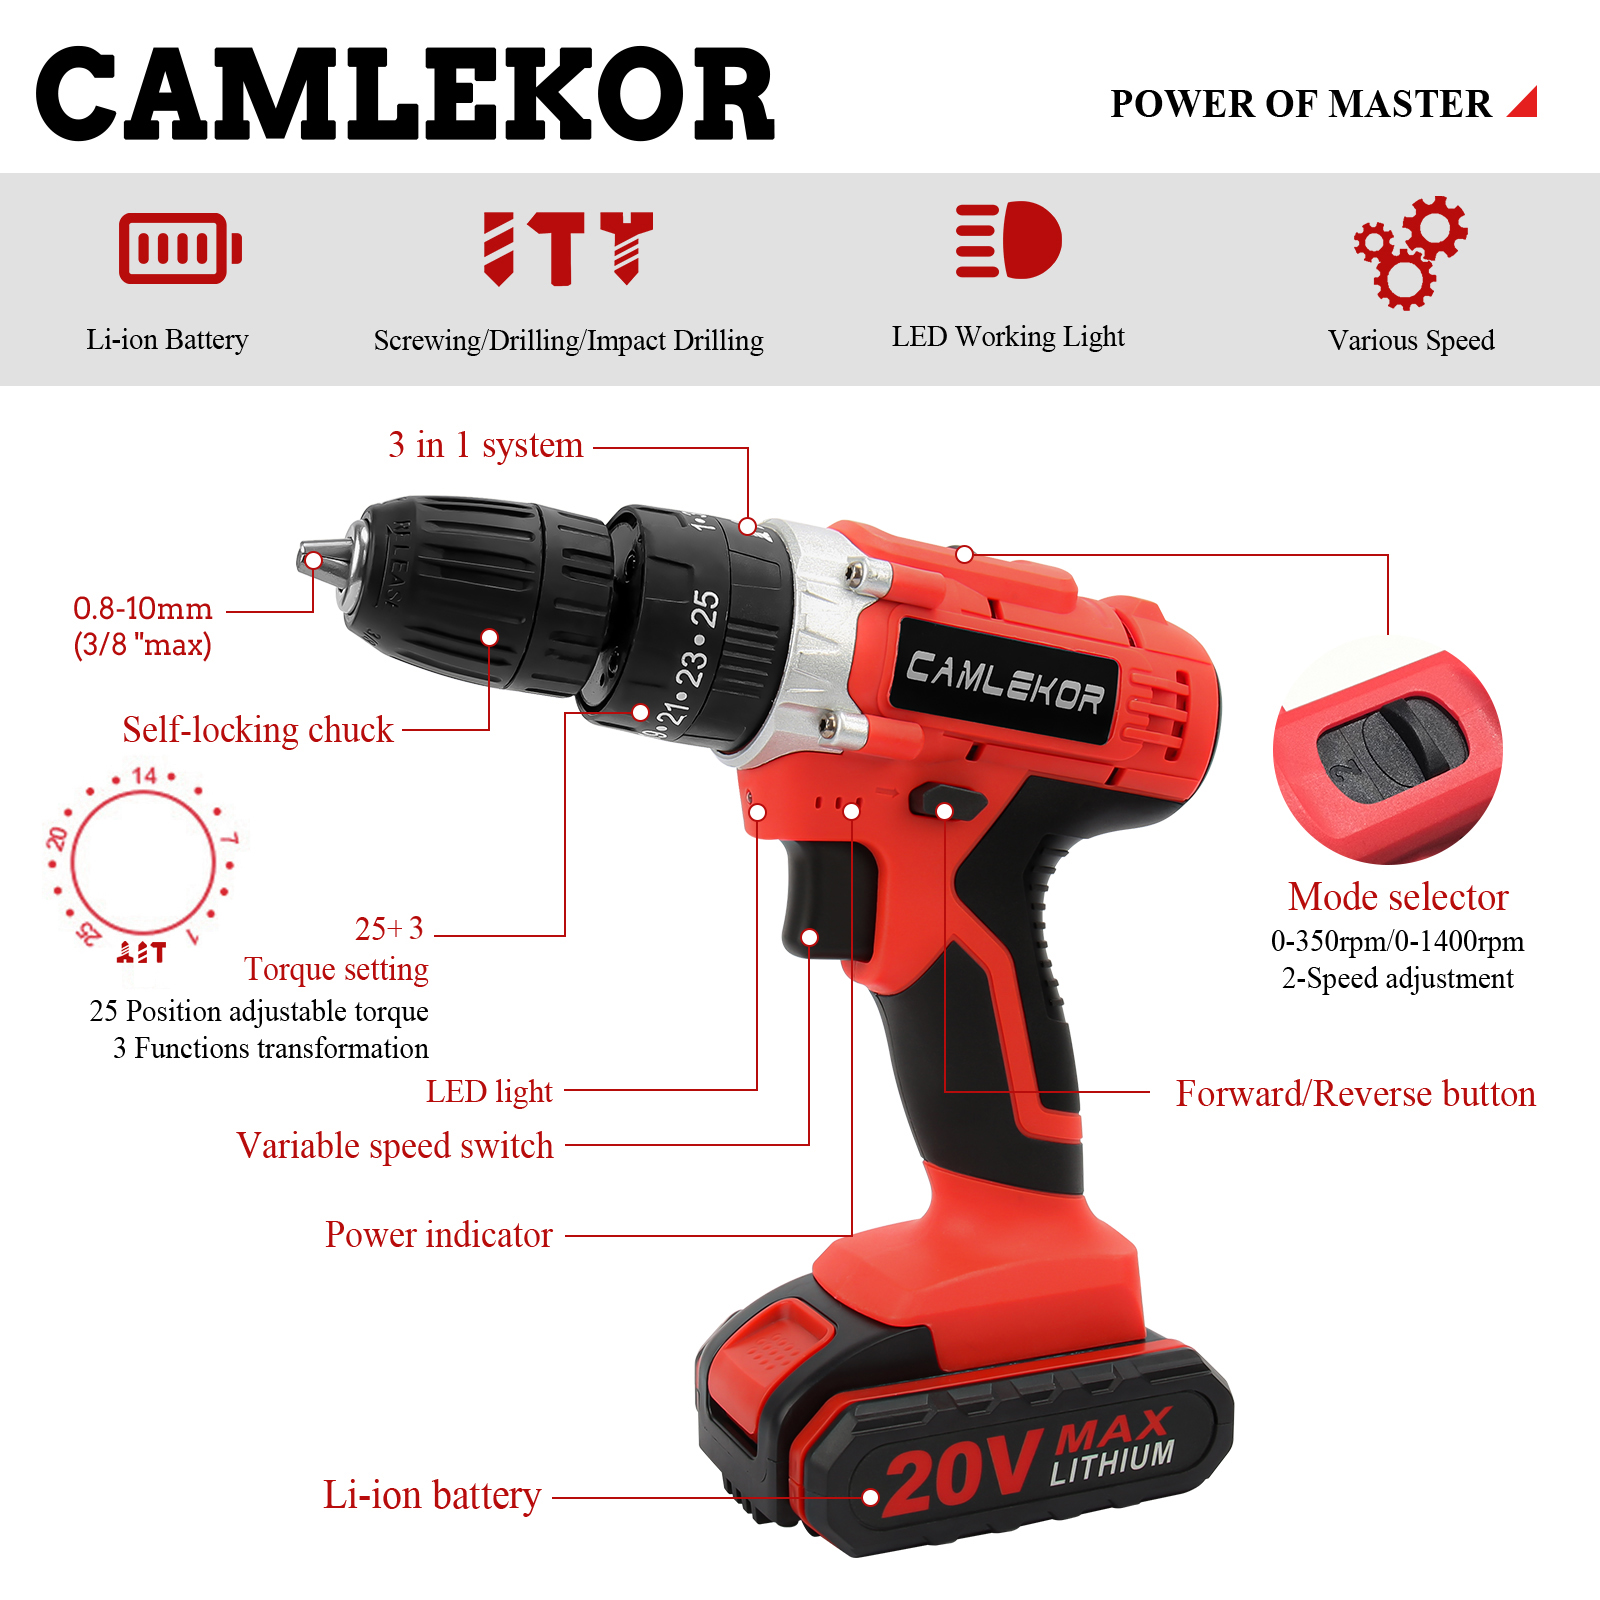 Camlekor Cordless Drill 20V, Electric Power Drill Set 3/8'' Impact Drill, 2 Variable Speeds & 25+3 Position Setting with LED Work Light - image 4 of 8